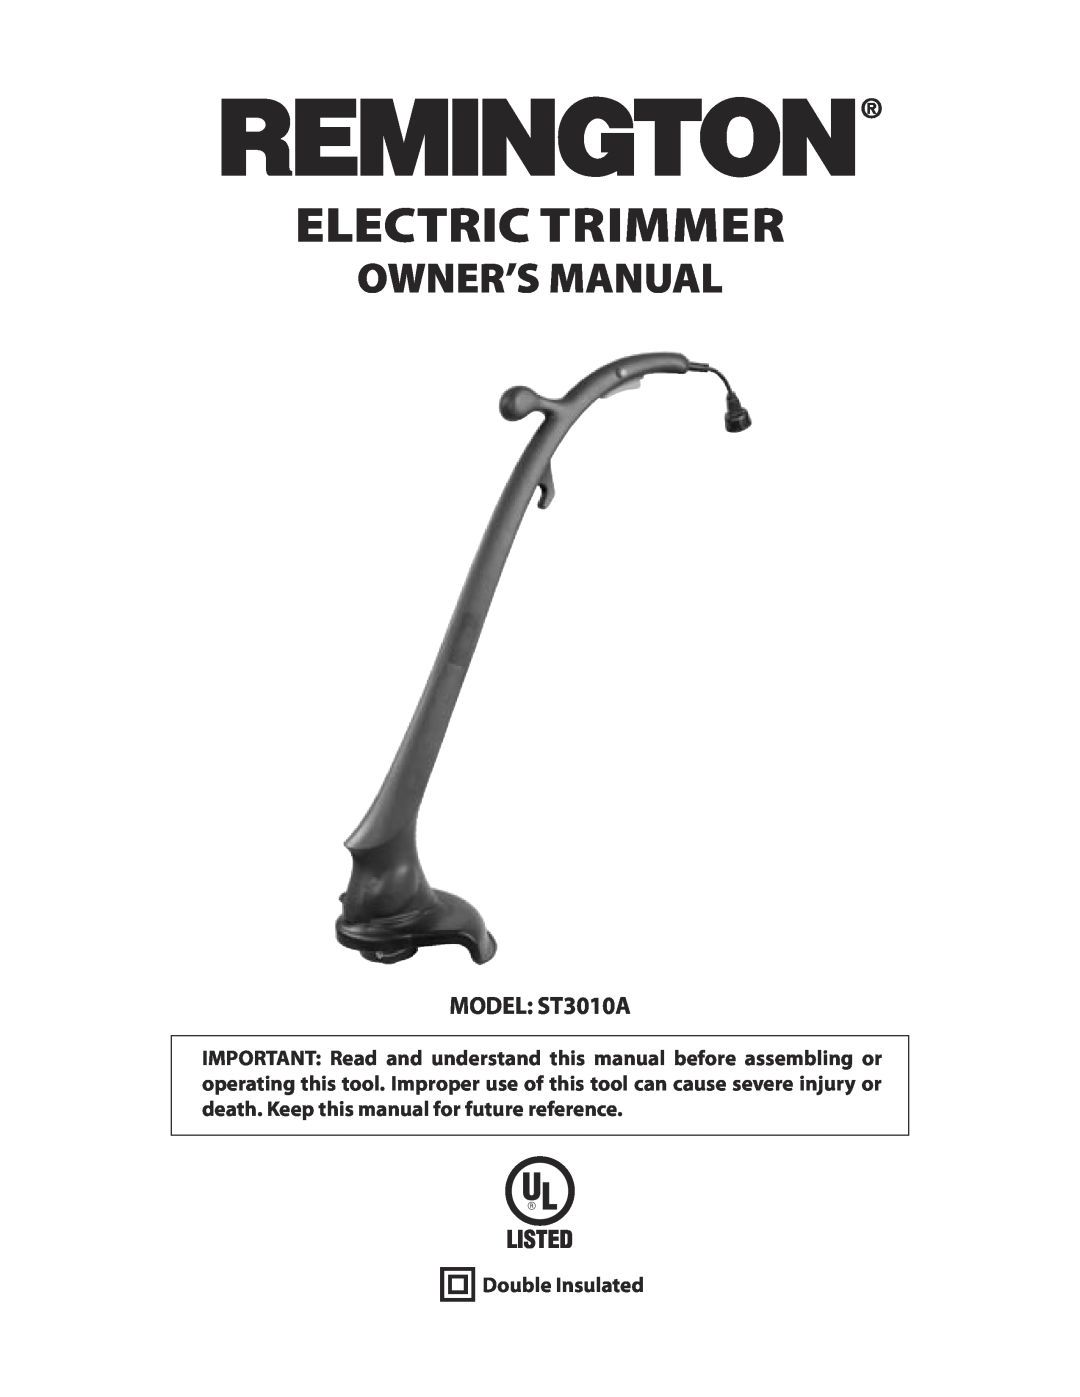 Remington owner manual Electric Trimmer, MODEL ST3010A, Double Insulated 